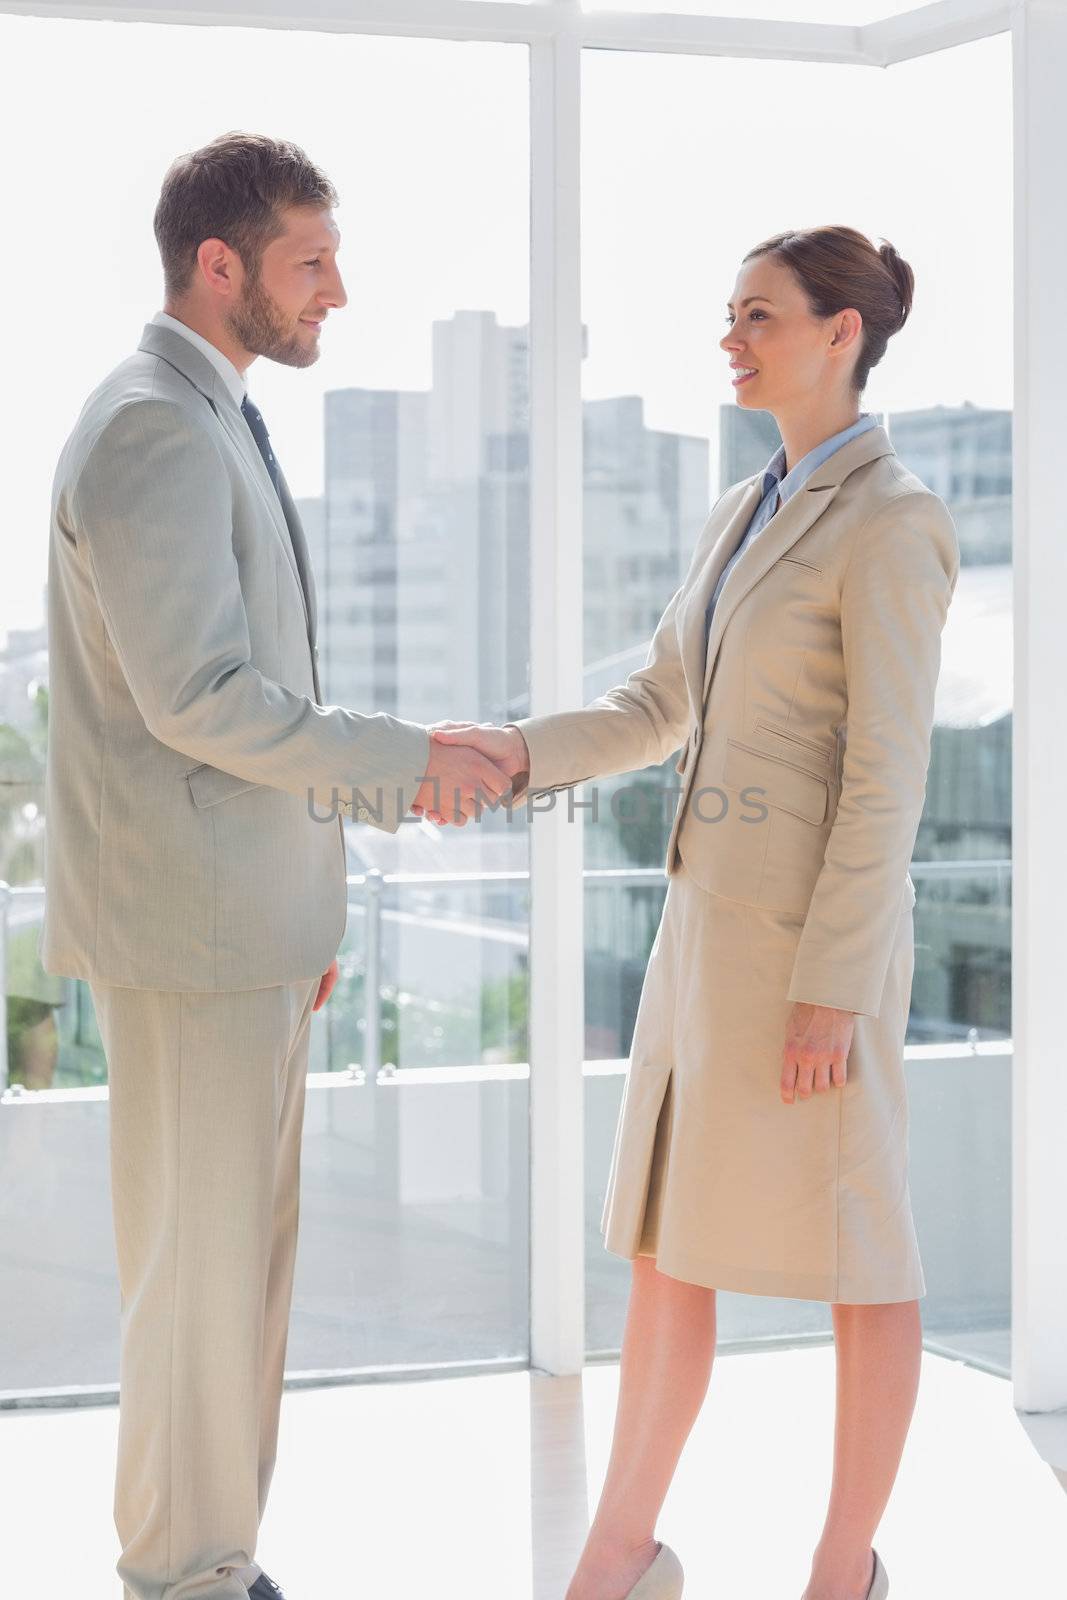 Business people shaking hands and smiling in a large office